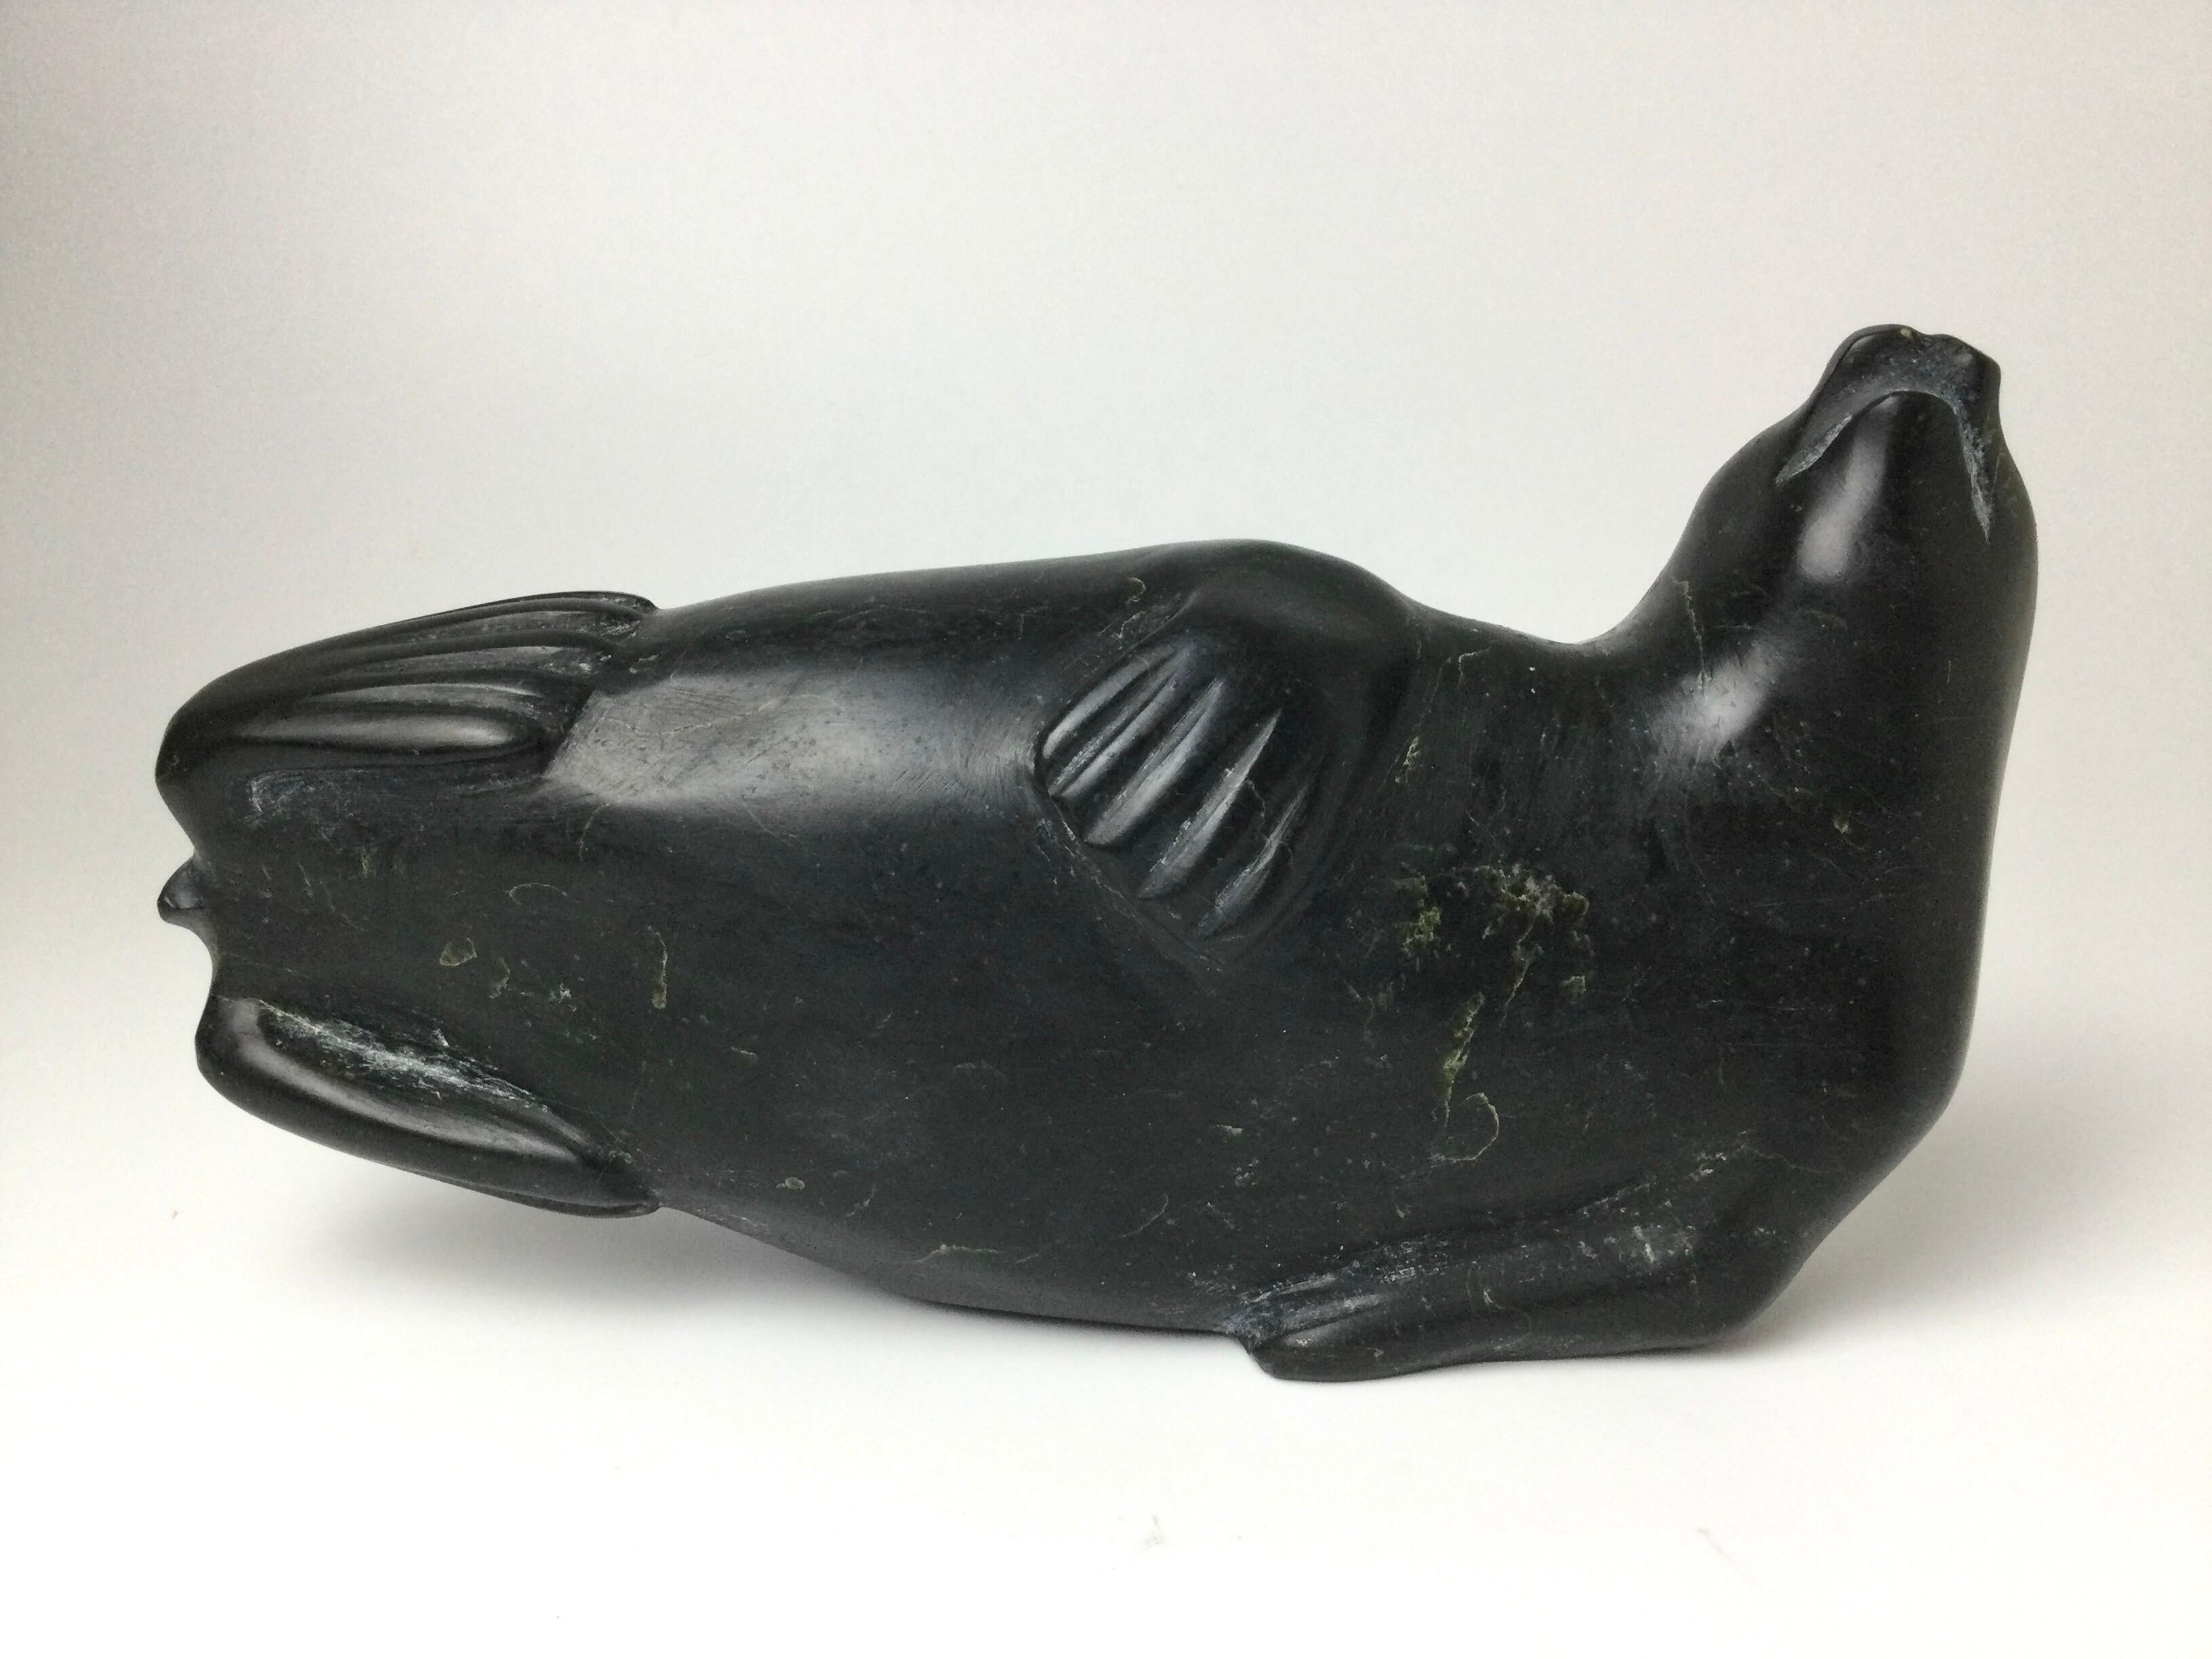 inuit soapstone seal carving